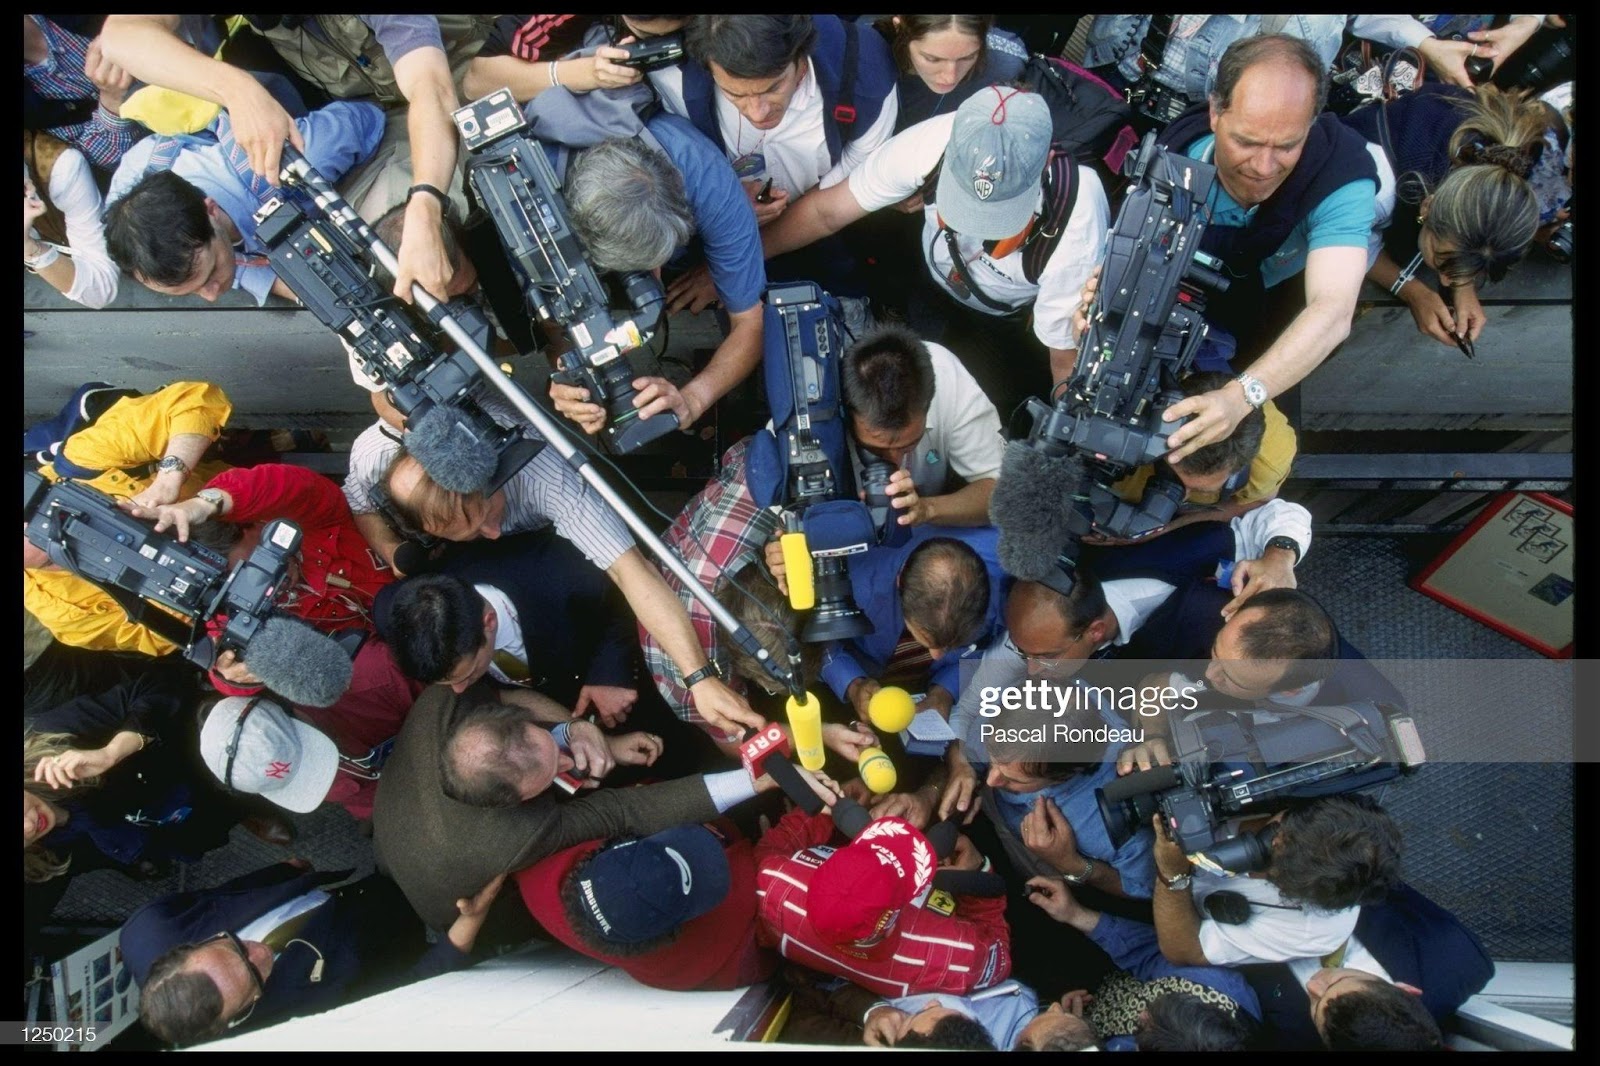 05 April 1996: the press besieges Michael Schumacher during the San Marino Grand Prix in Imola.